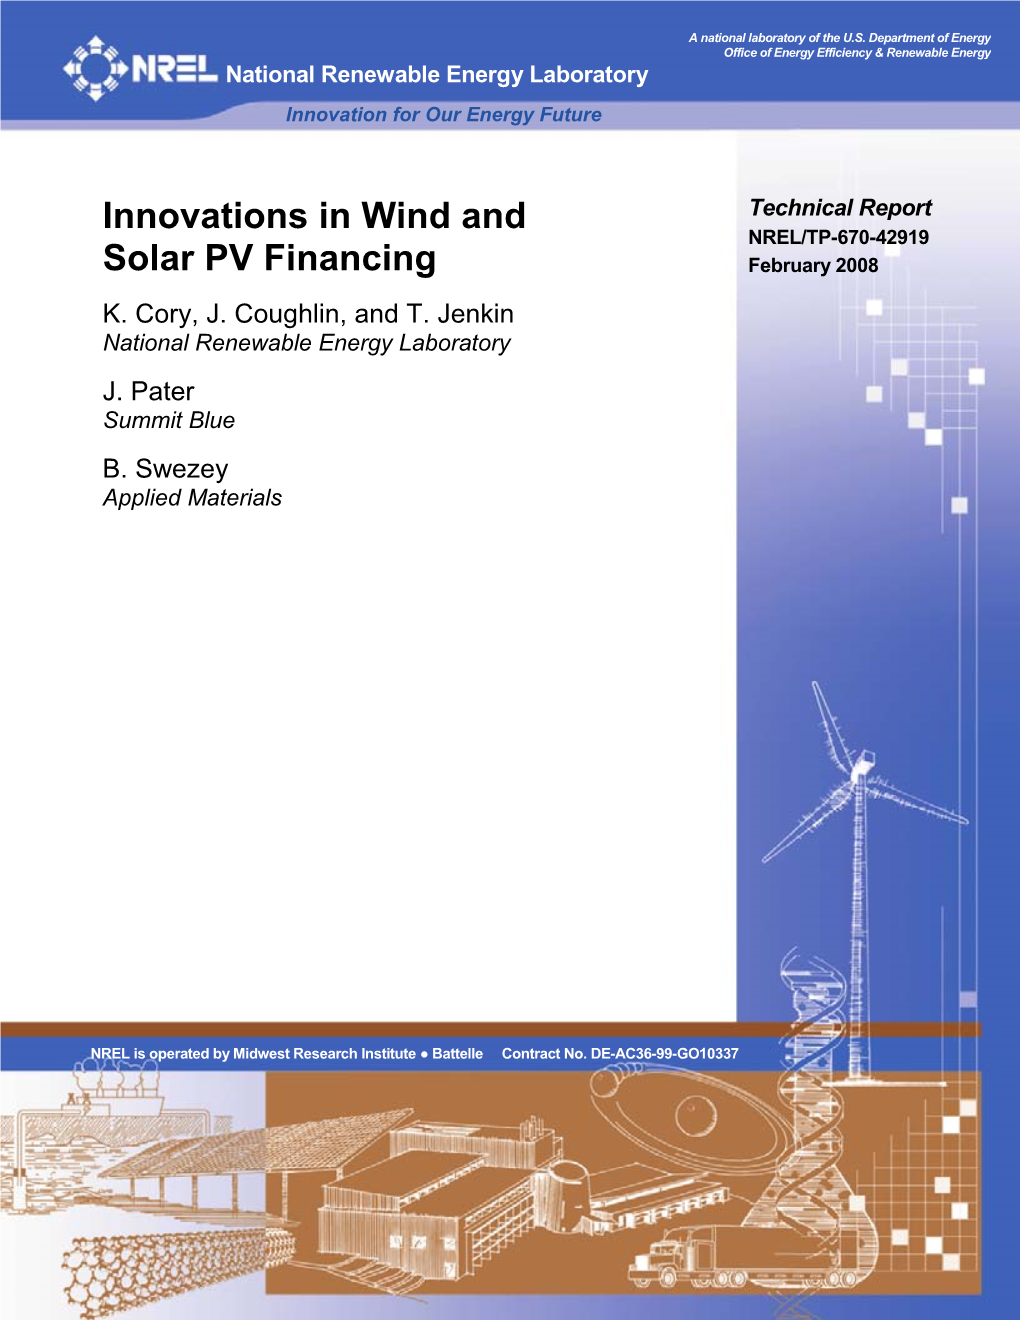 Innovations in Wind and Solar PV Financing DE-AC36-99-GO10337